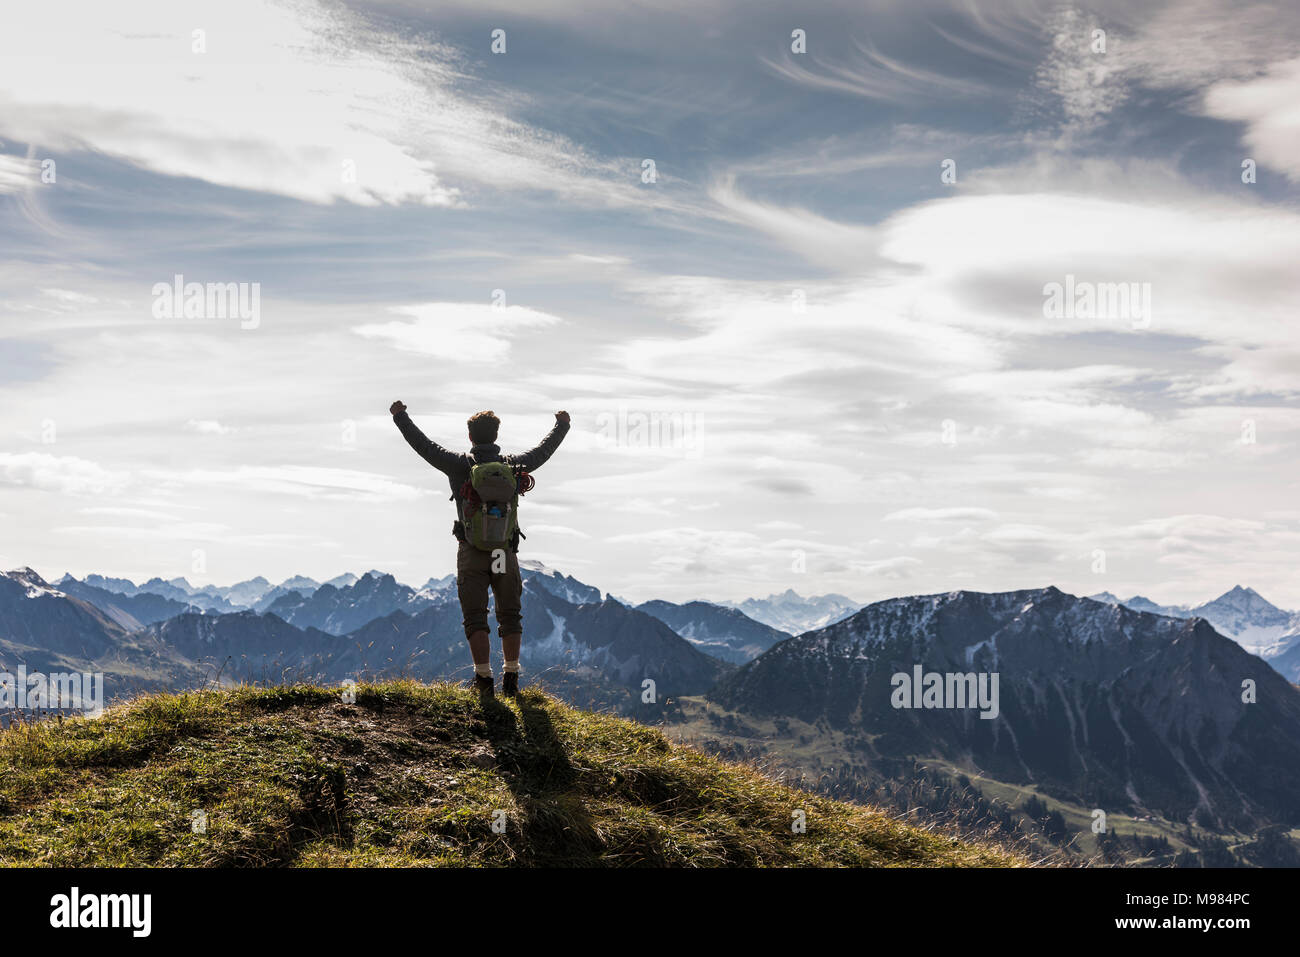 Austria, Tyrol, young man standing in mountainscape cheering Stock Photo